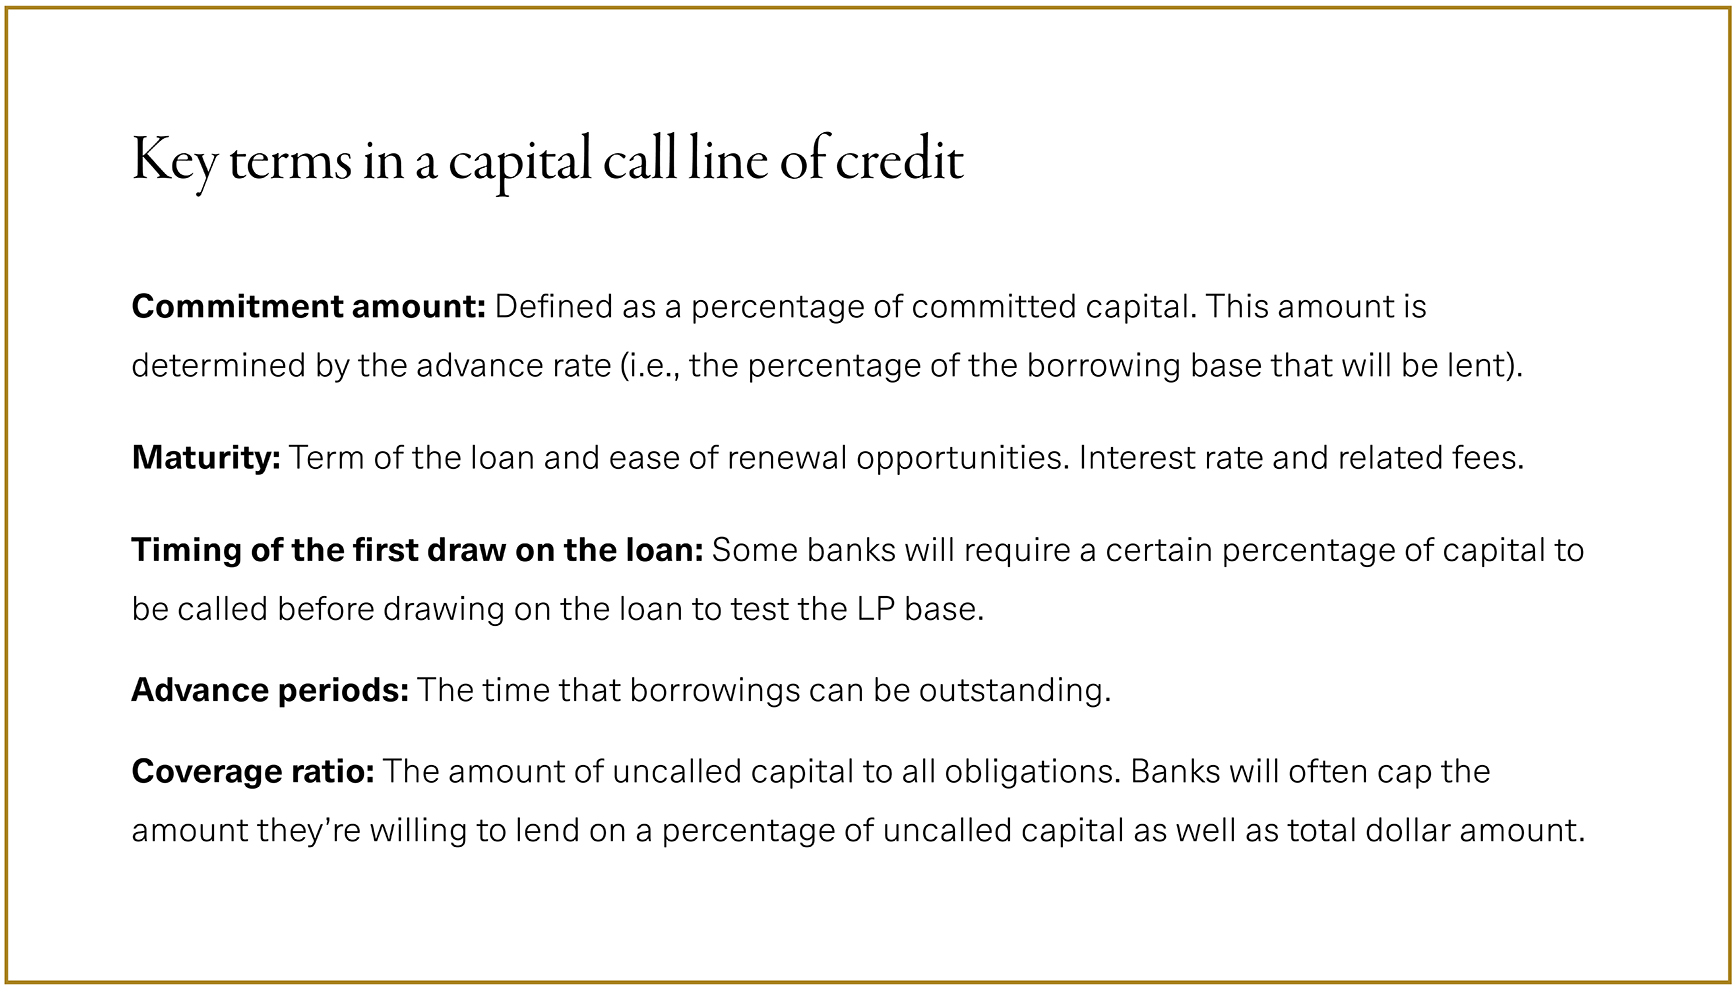 Key terms in a capital call line of credit